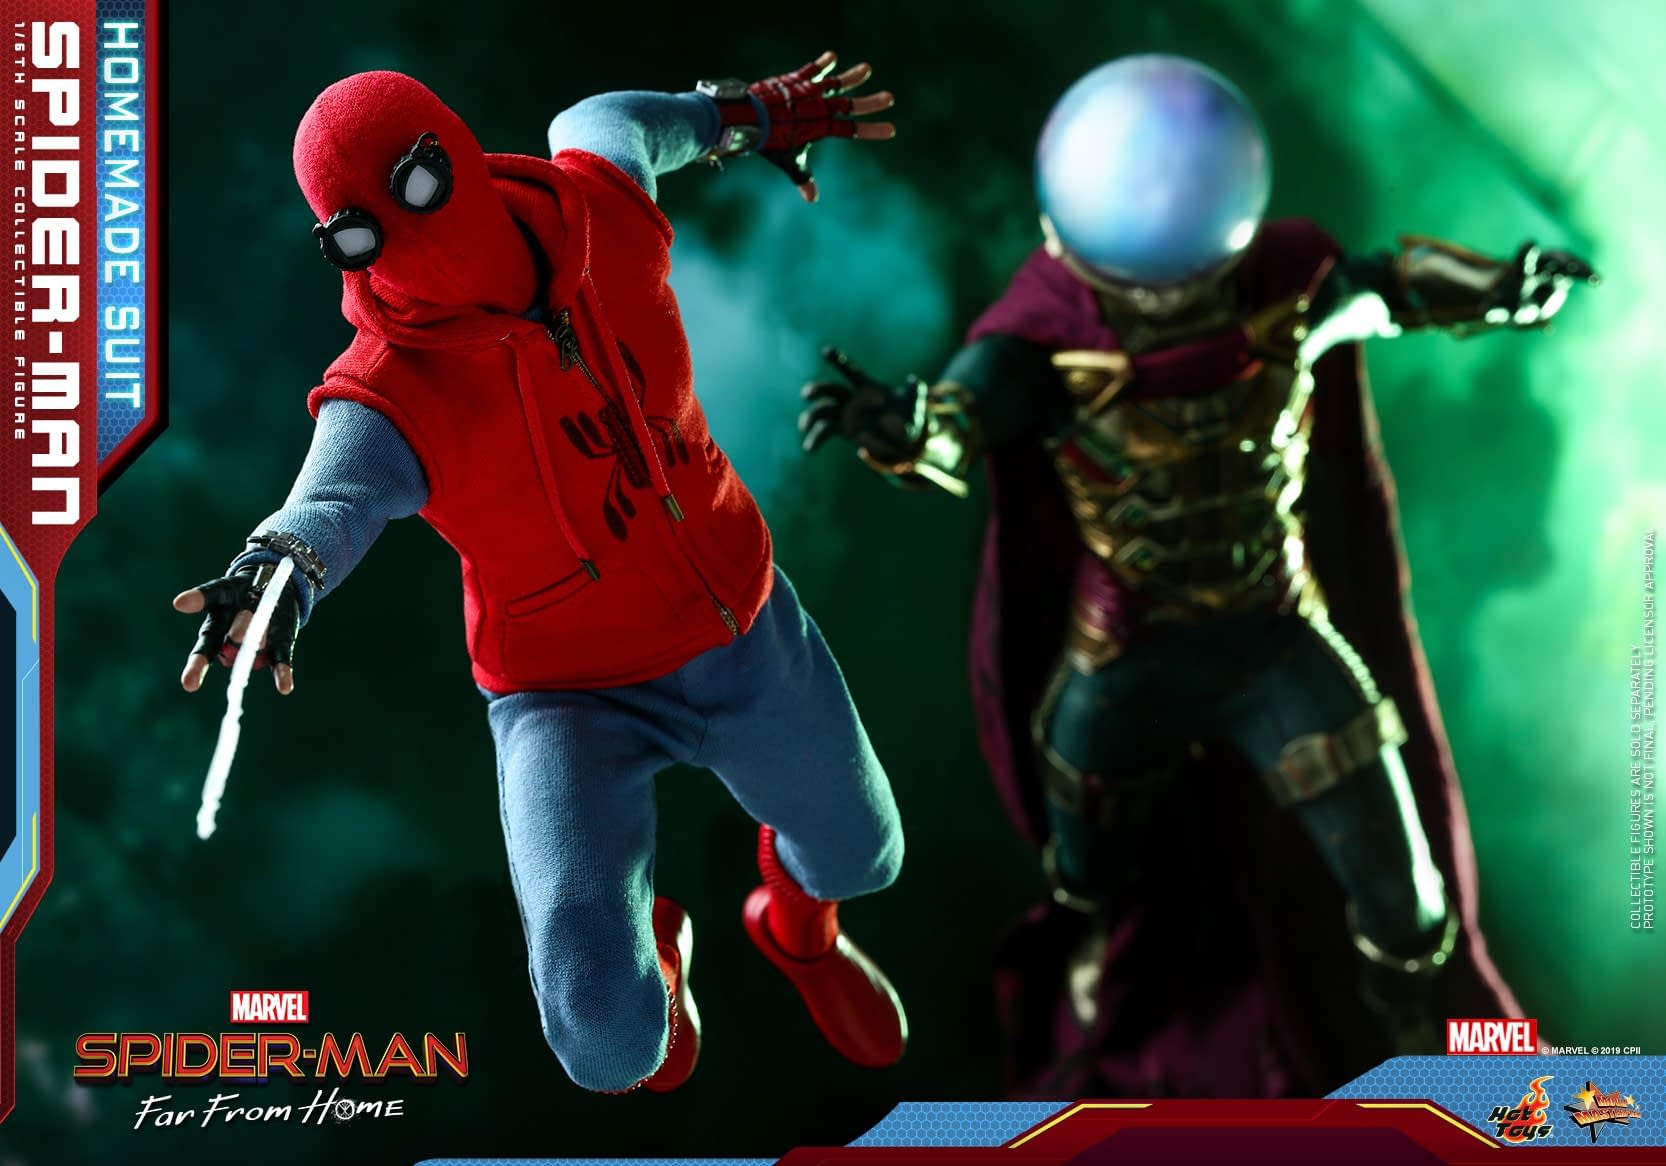 Fight through Mysterio's Illusions with New Hot Toys Spider-Man Figure